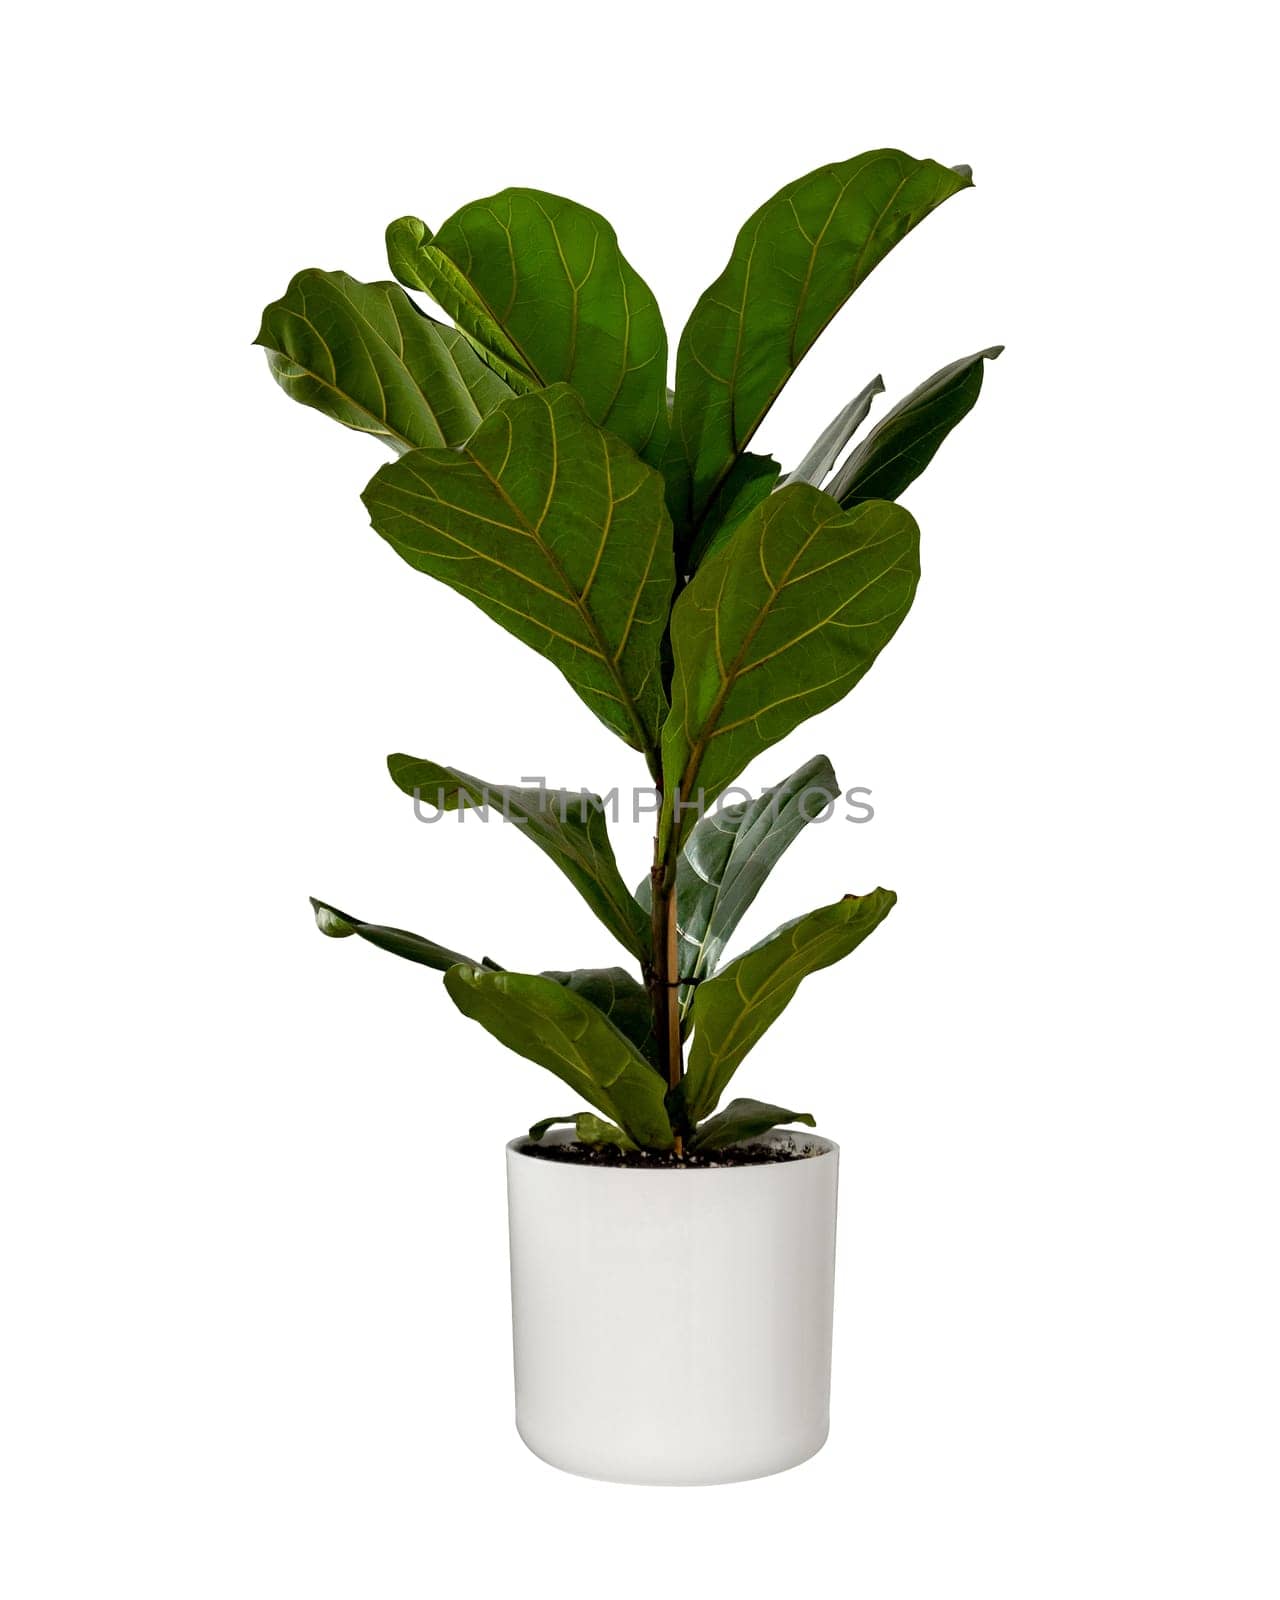 Ficus lyrata or fiddle leaf fig tree isolated by fascinadora